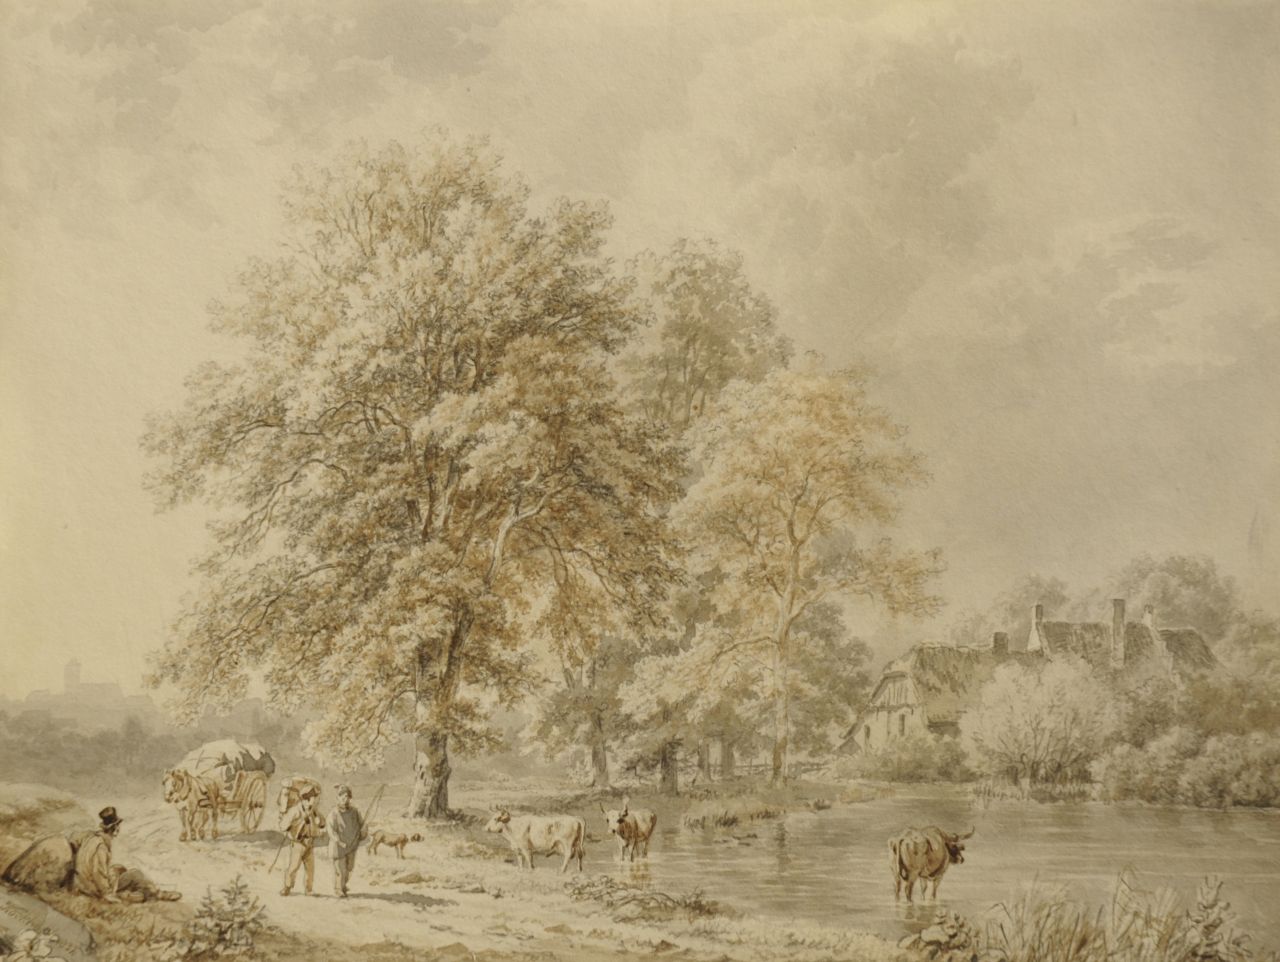 Koekkoek B.C.  | Barend Cornelis Koekkoek, Travellers and cattle on a wooded path along a brook, washed pen on paper 16.4 x 22.0 cm, signed l.l. and painted 1837